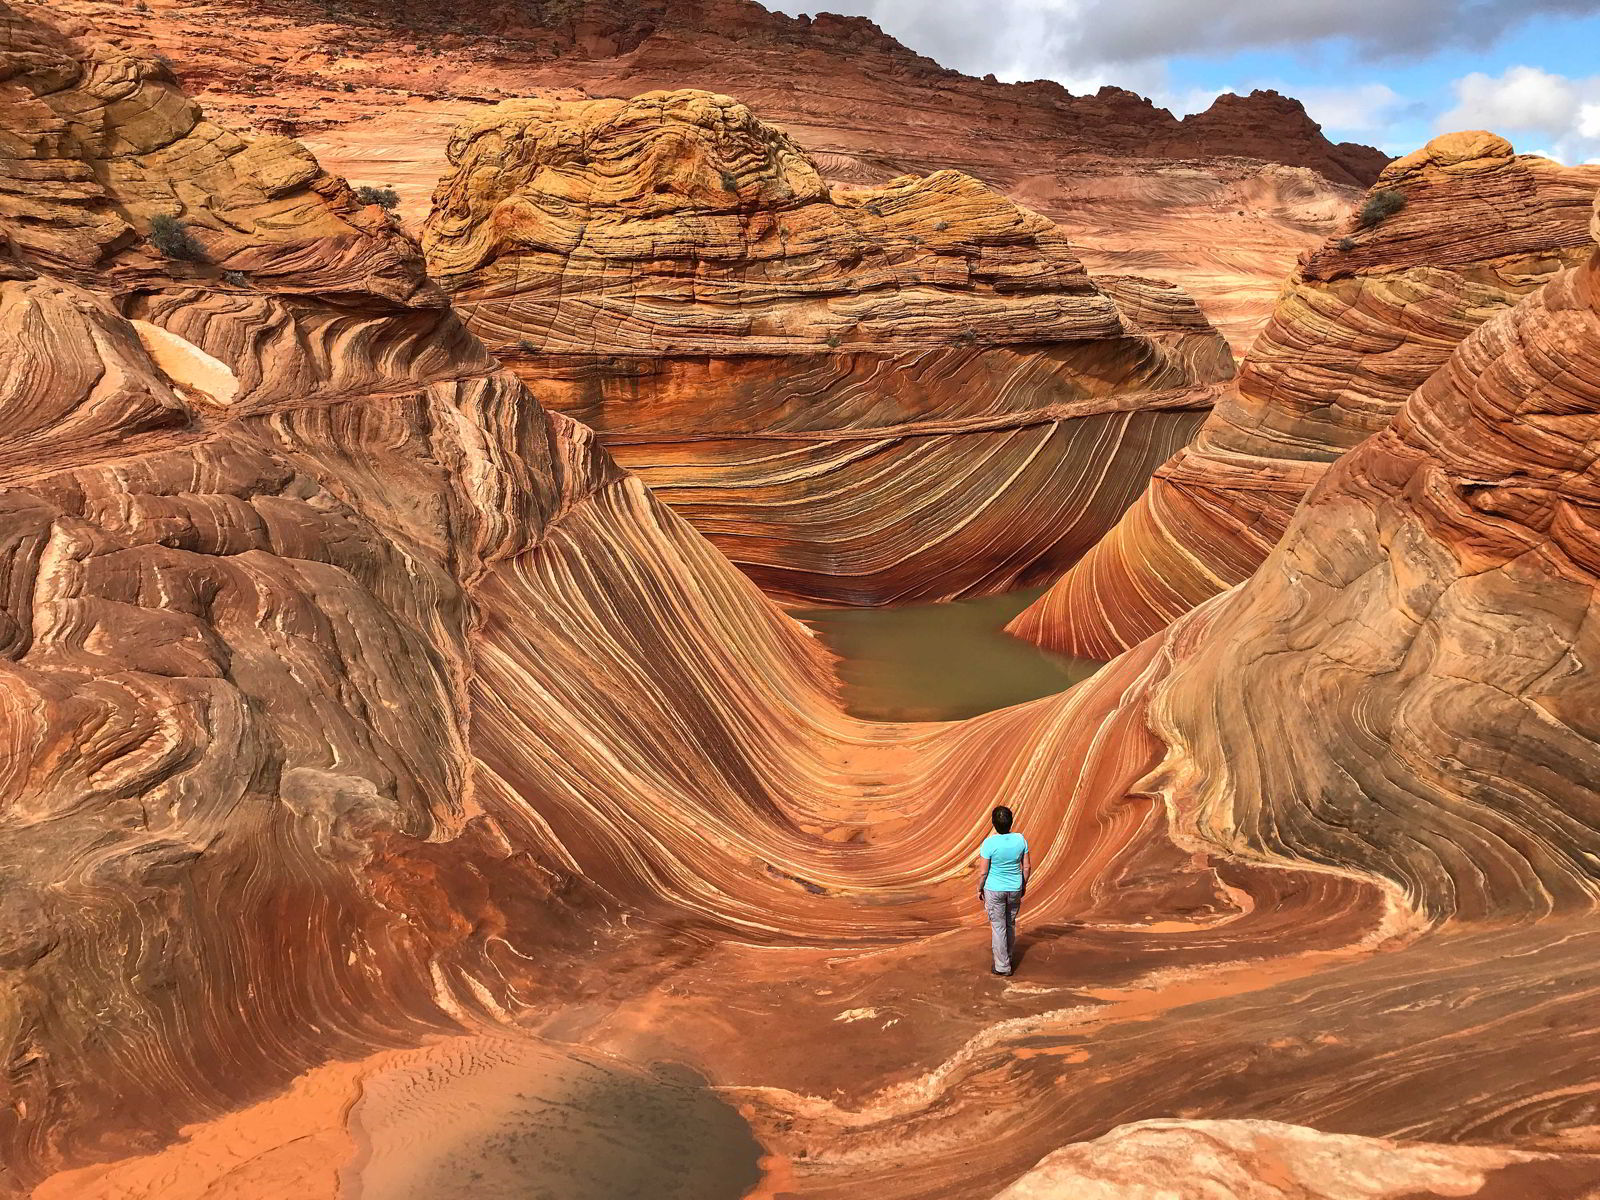 An image of a woman hiking the wave in Arizona, USA.